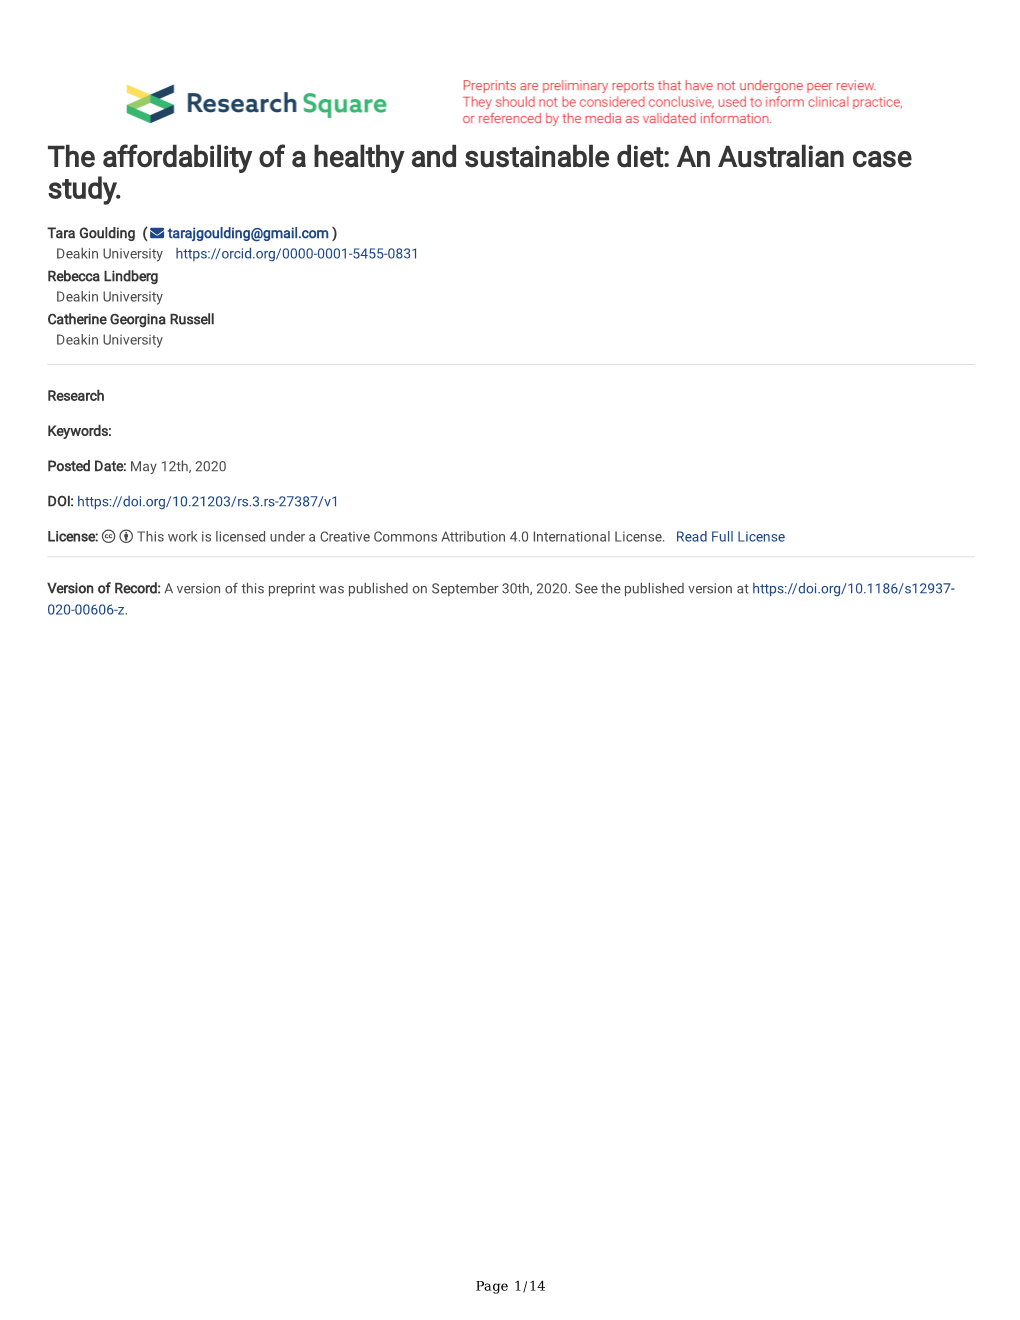 The Affordability of a Healthy and Sustainable Diet: an Australian Case Study